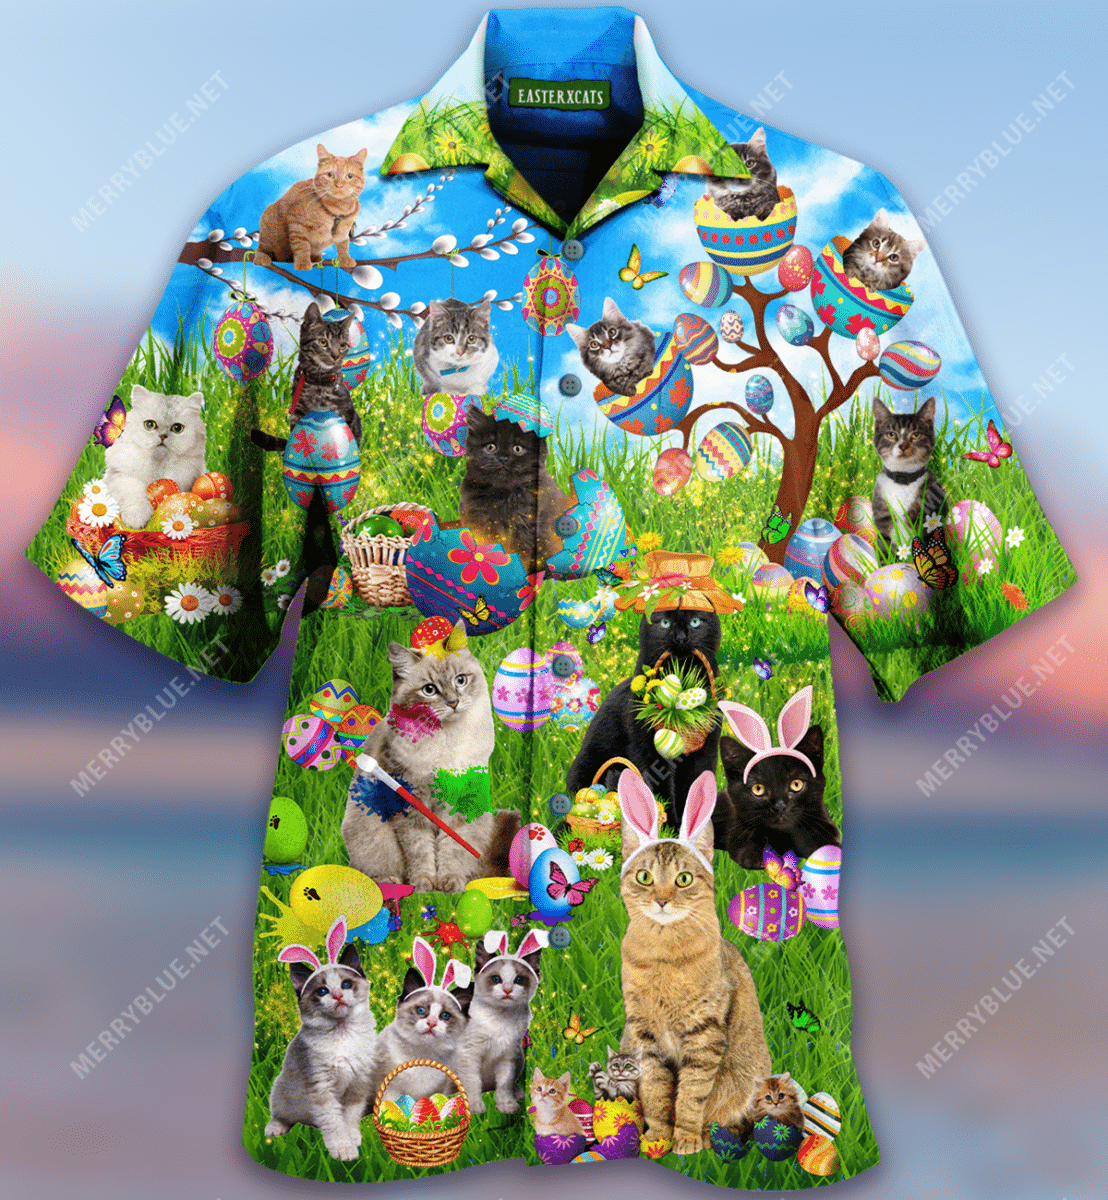 The Great Gift Of Easter Is A Cat Unisex Hawaiian Shirt